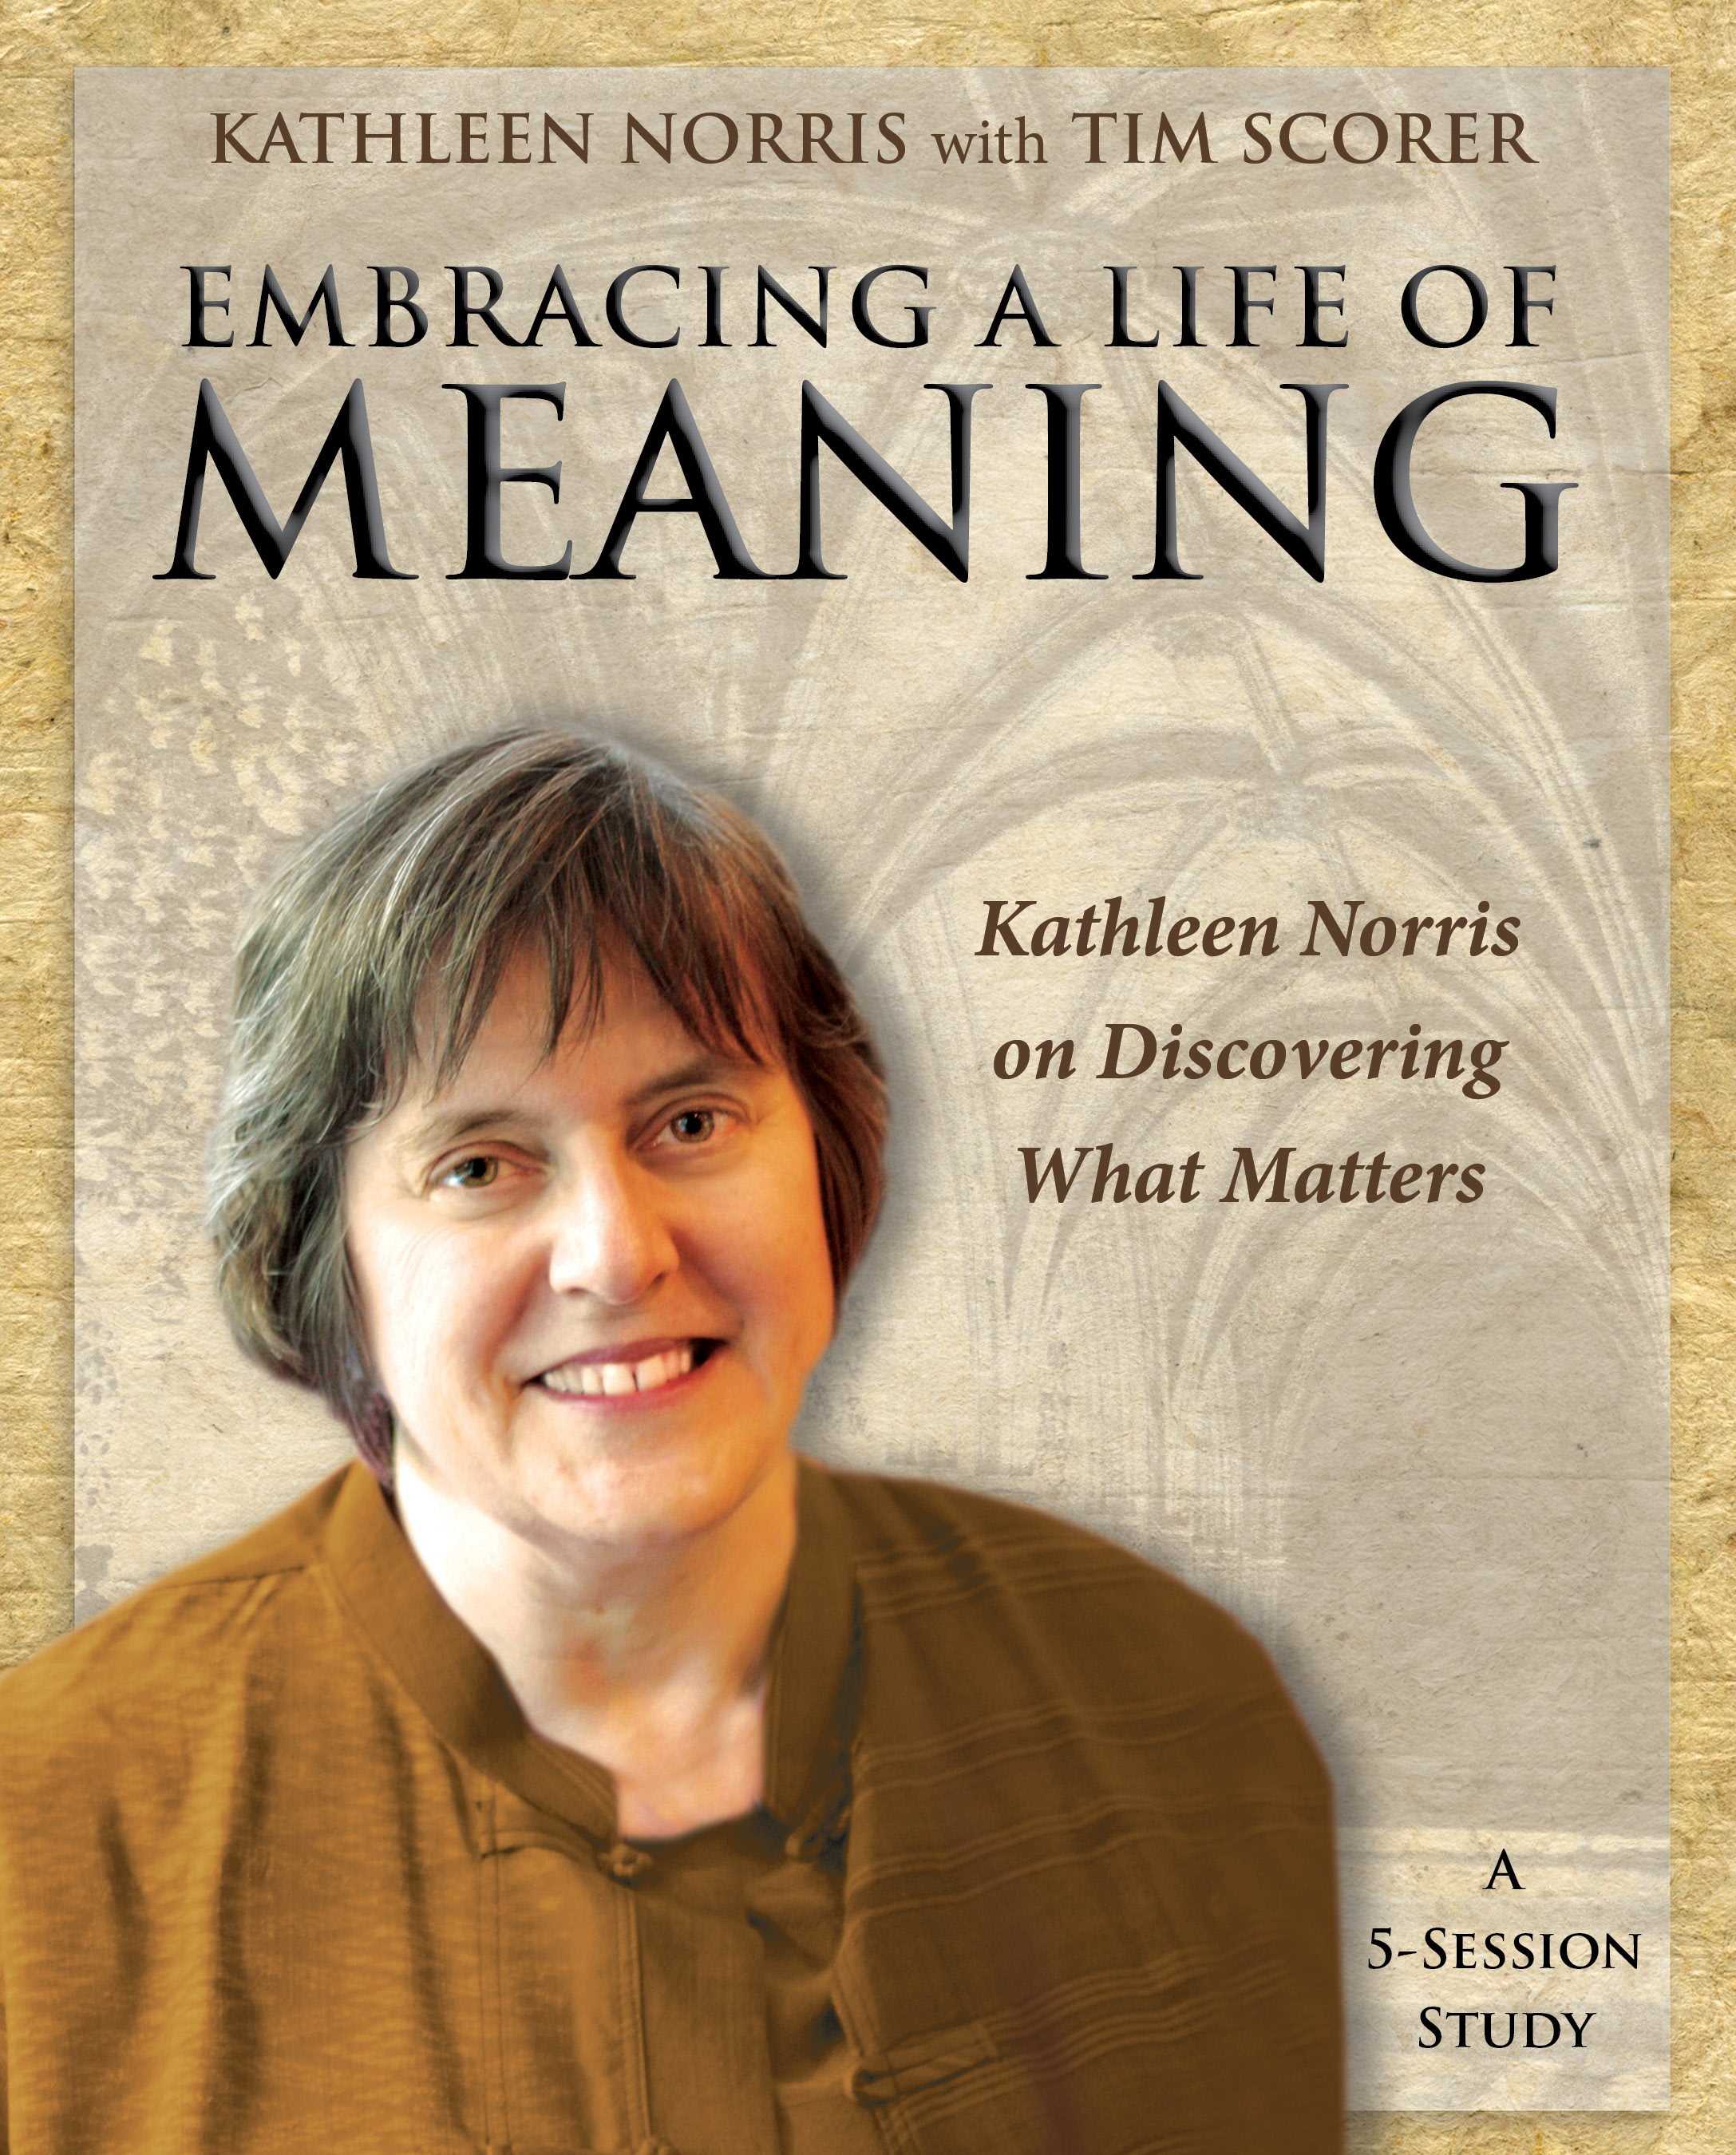 ChurchPublishing.org: Embracing a Life of Meaning - Workbook